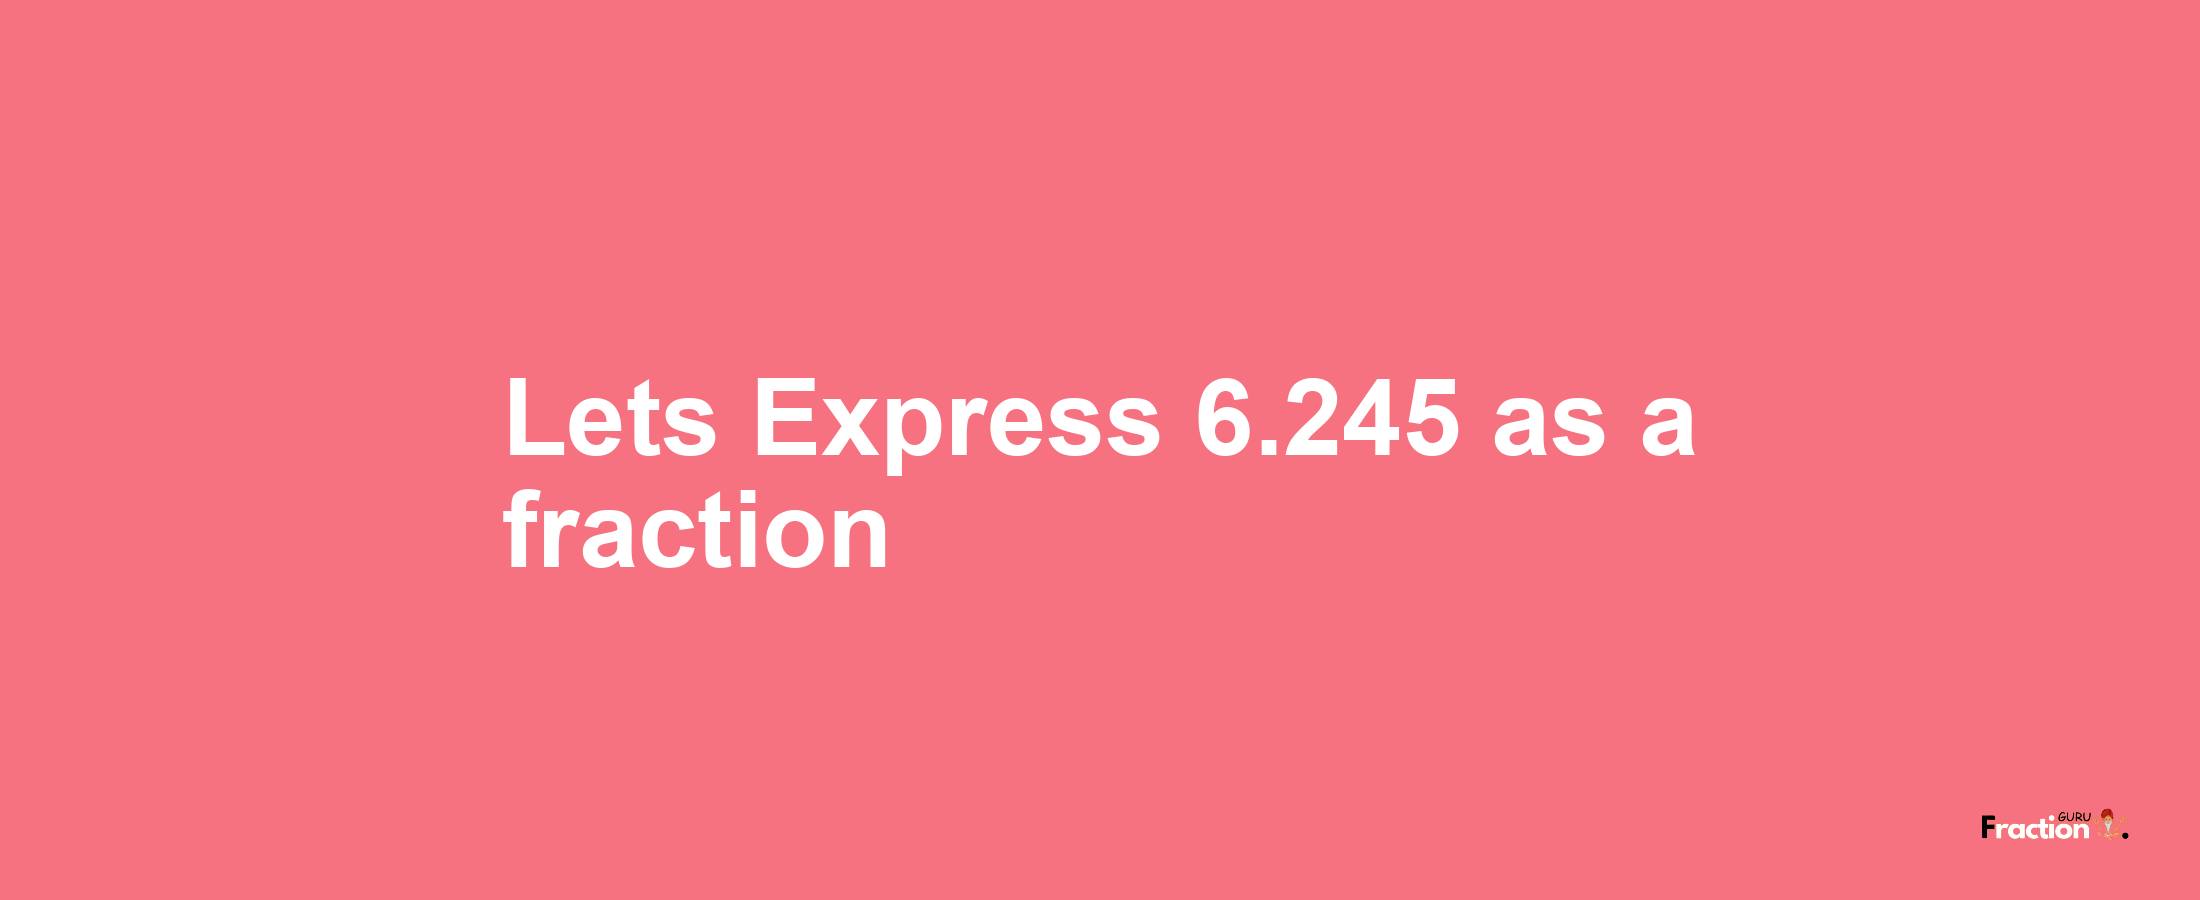 Lets Express 6.245 as afraction